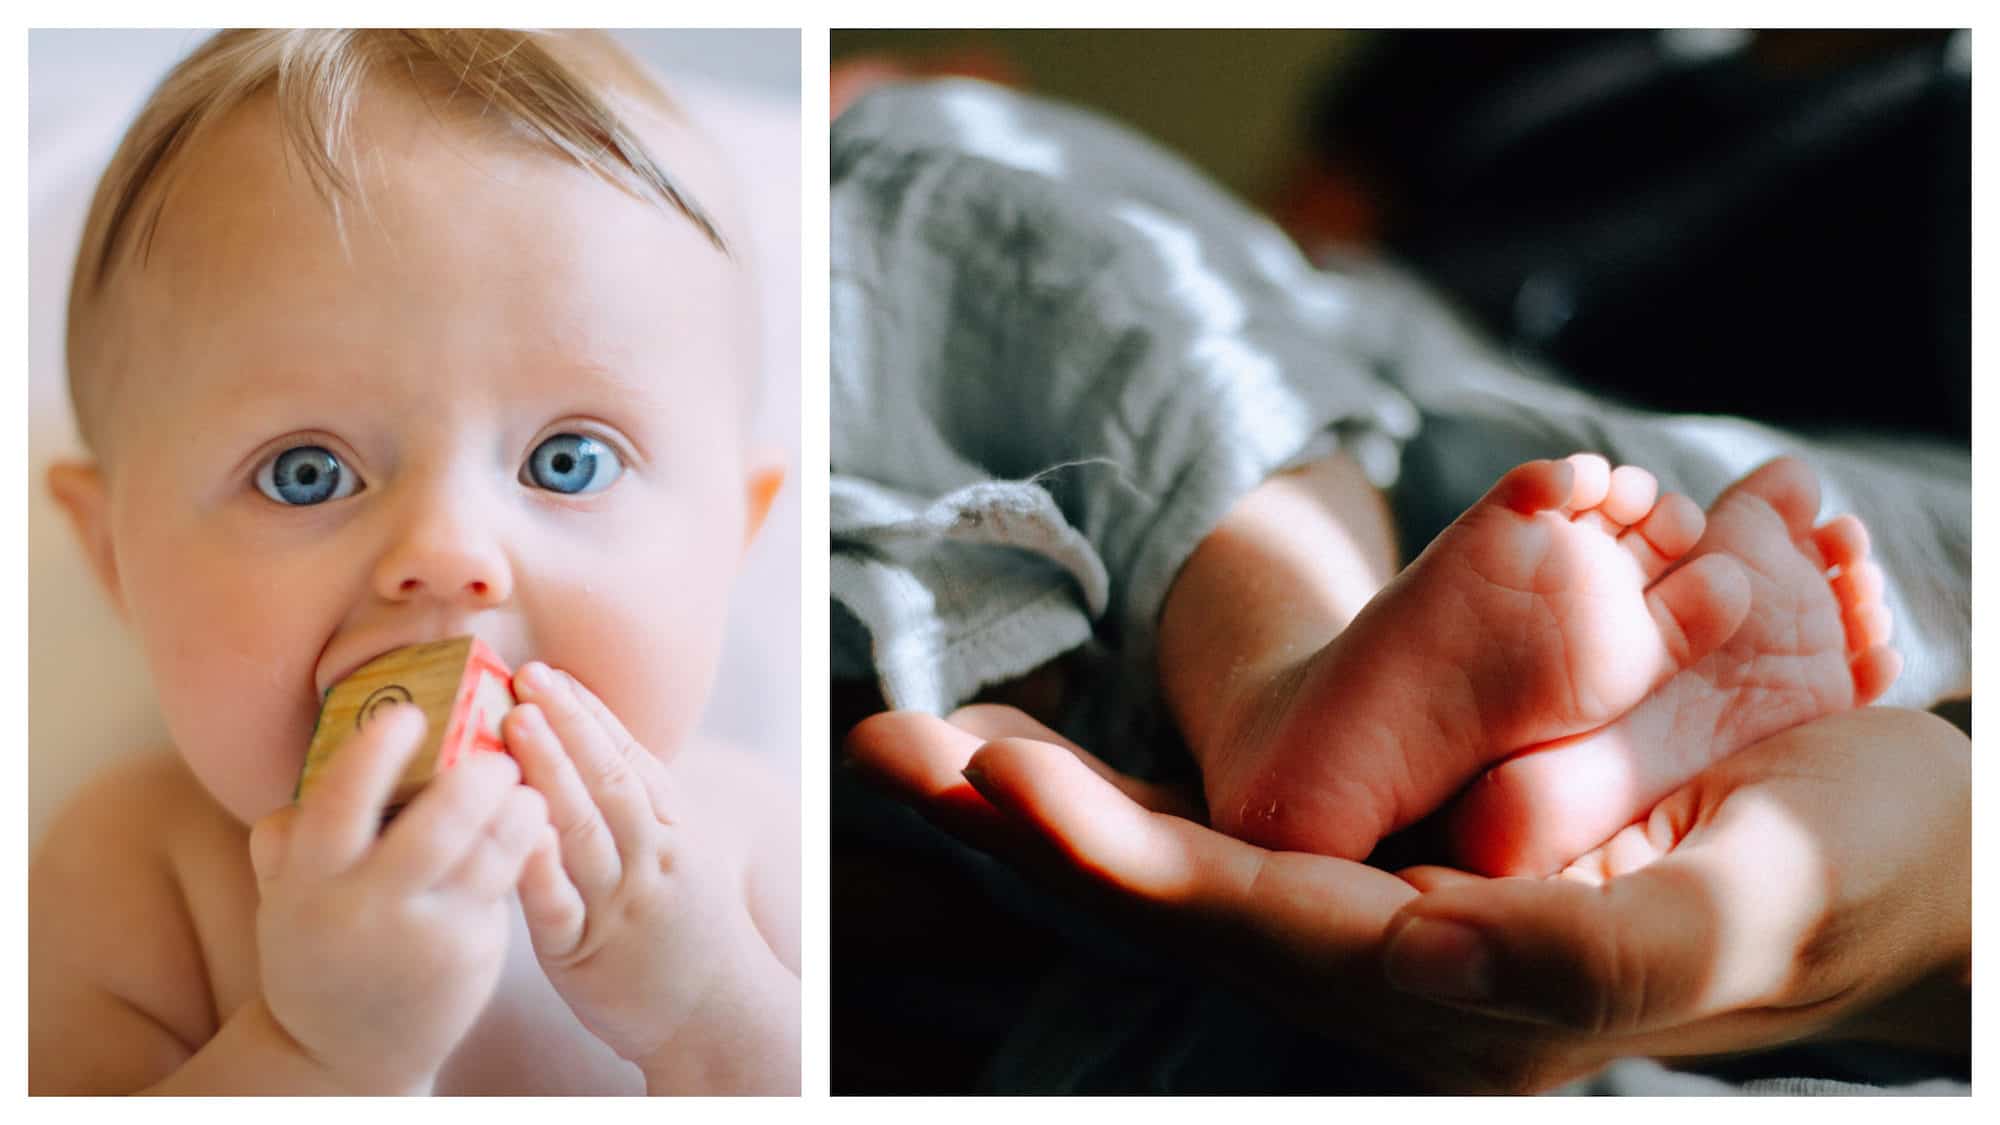 A blue-eyed baby boy chewing on a wooden cube (left). A baby in the arms of its parent, with its tiny feet in the foreground (right).